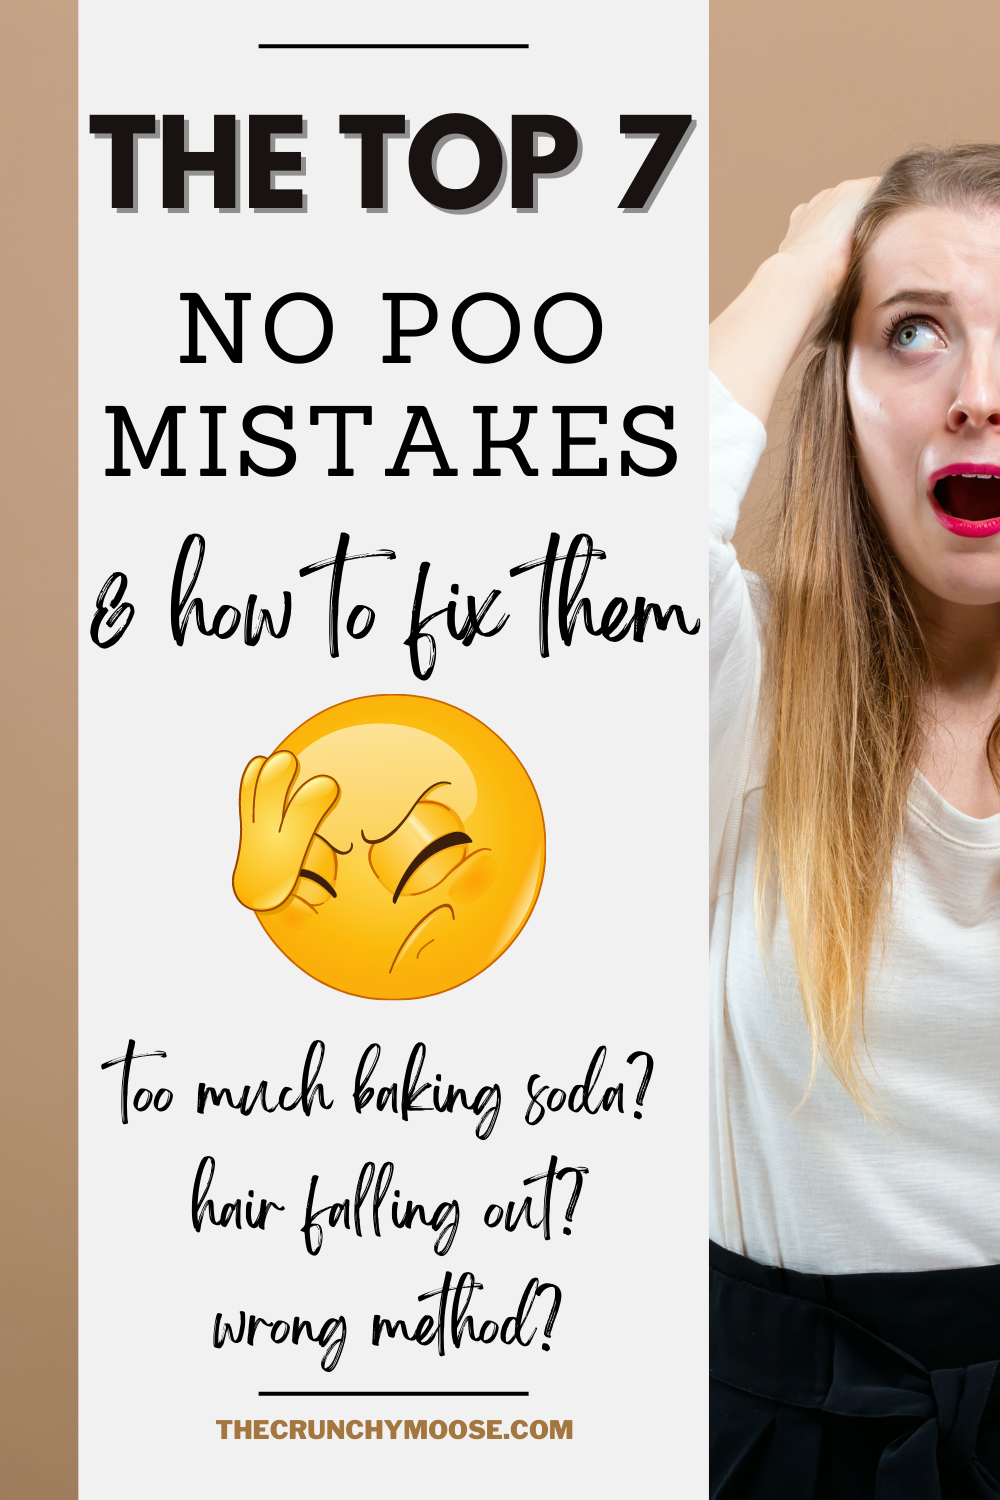 what am i doing wrong with the no poo method